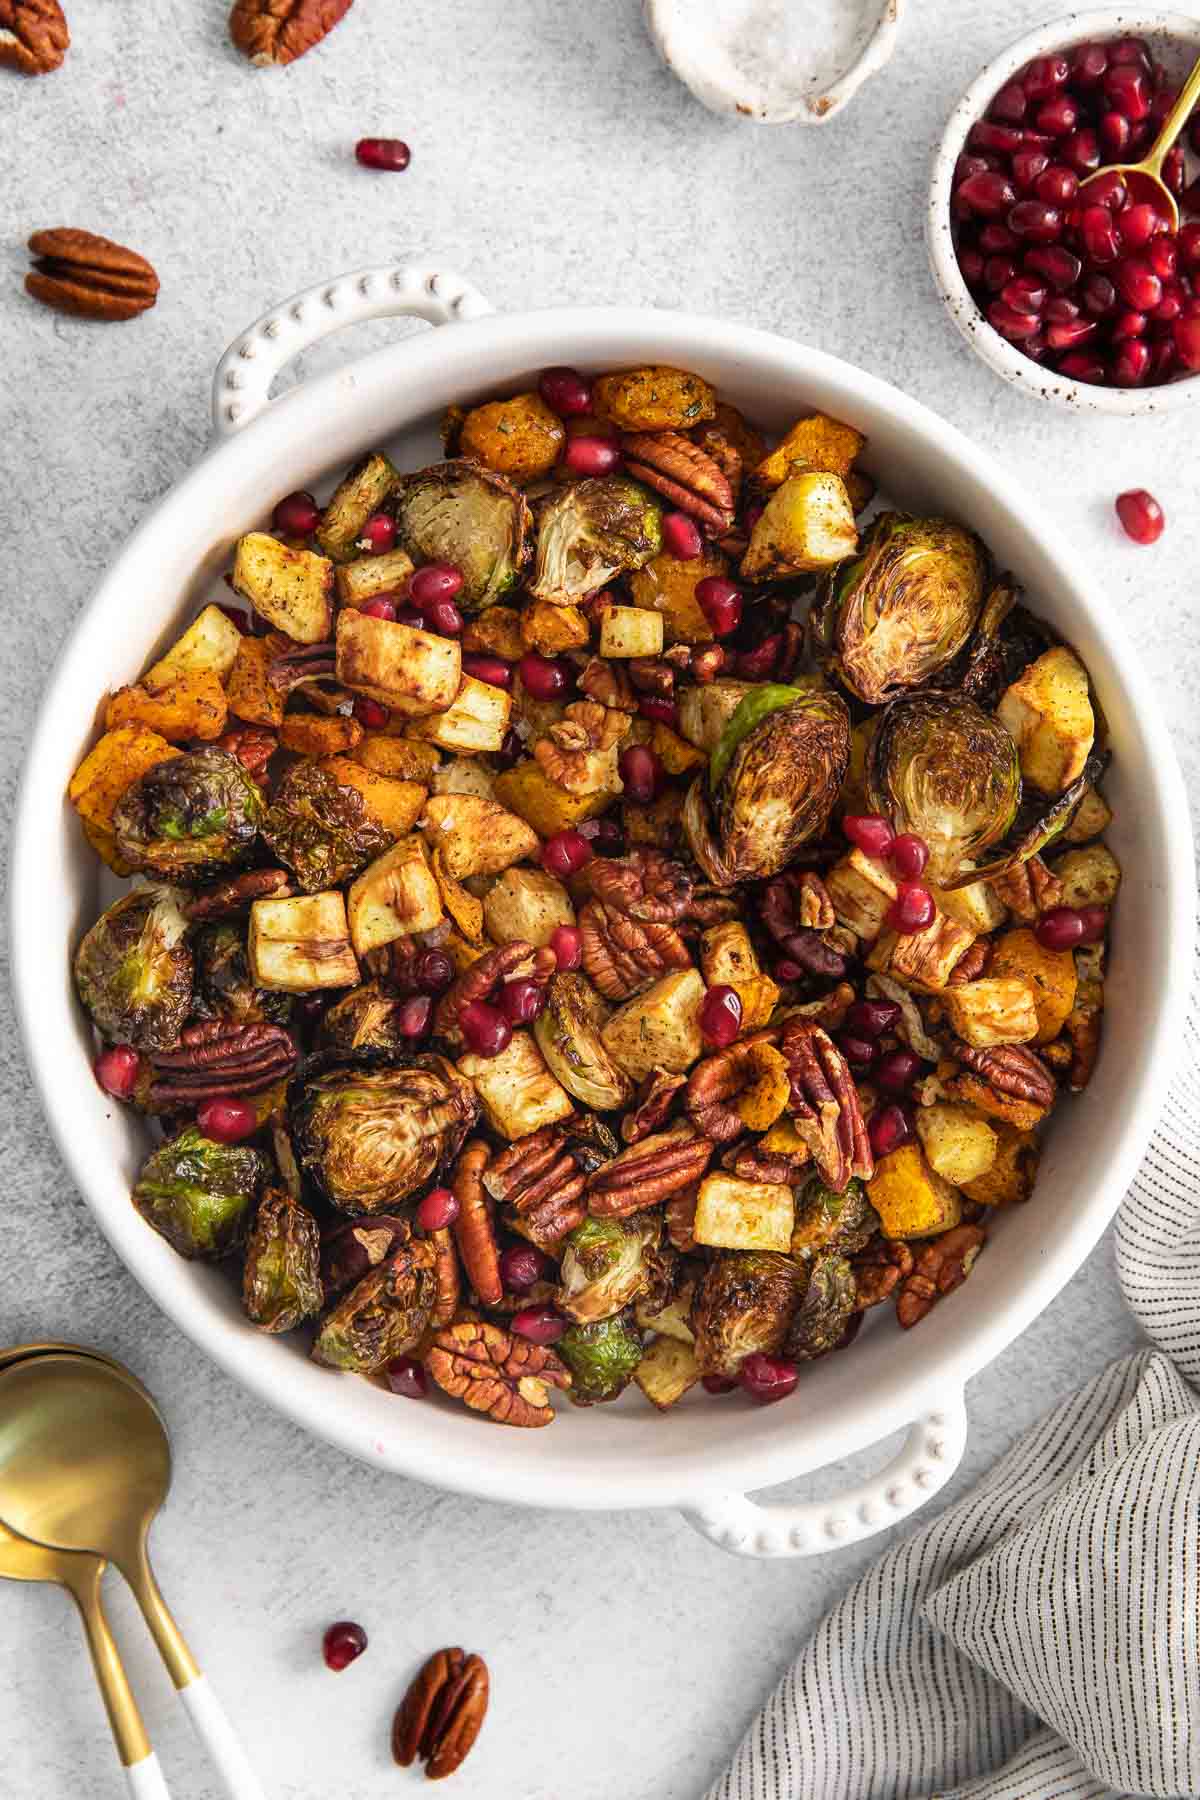 white serving bowl with air fryer roasted vegetables - brussel sprouts, butternut squash, parsnips, pecans and pomegranate seeds.